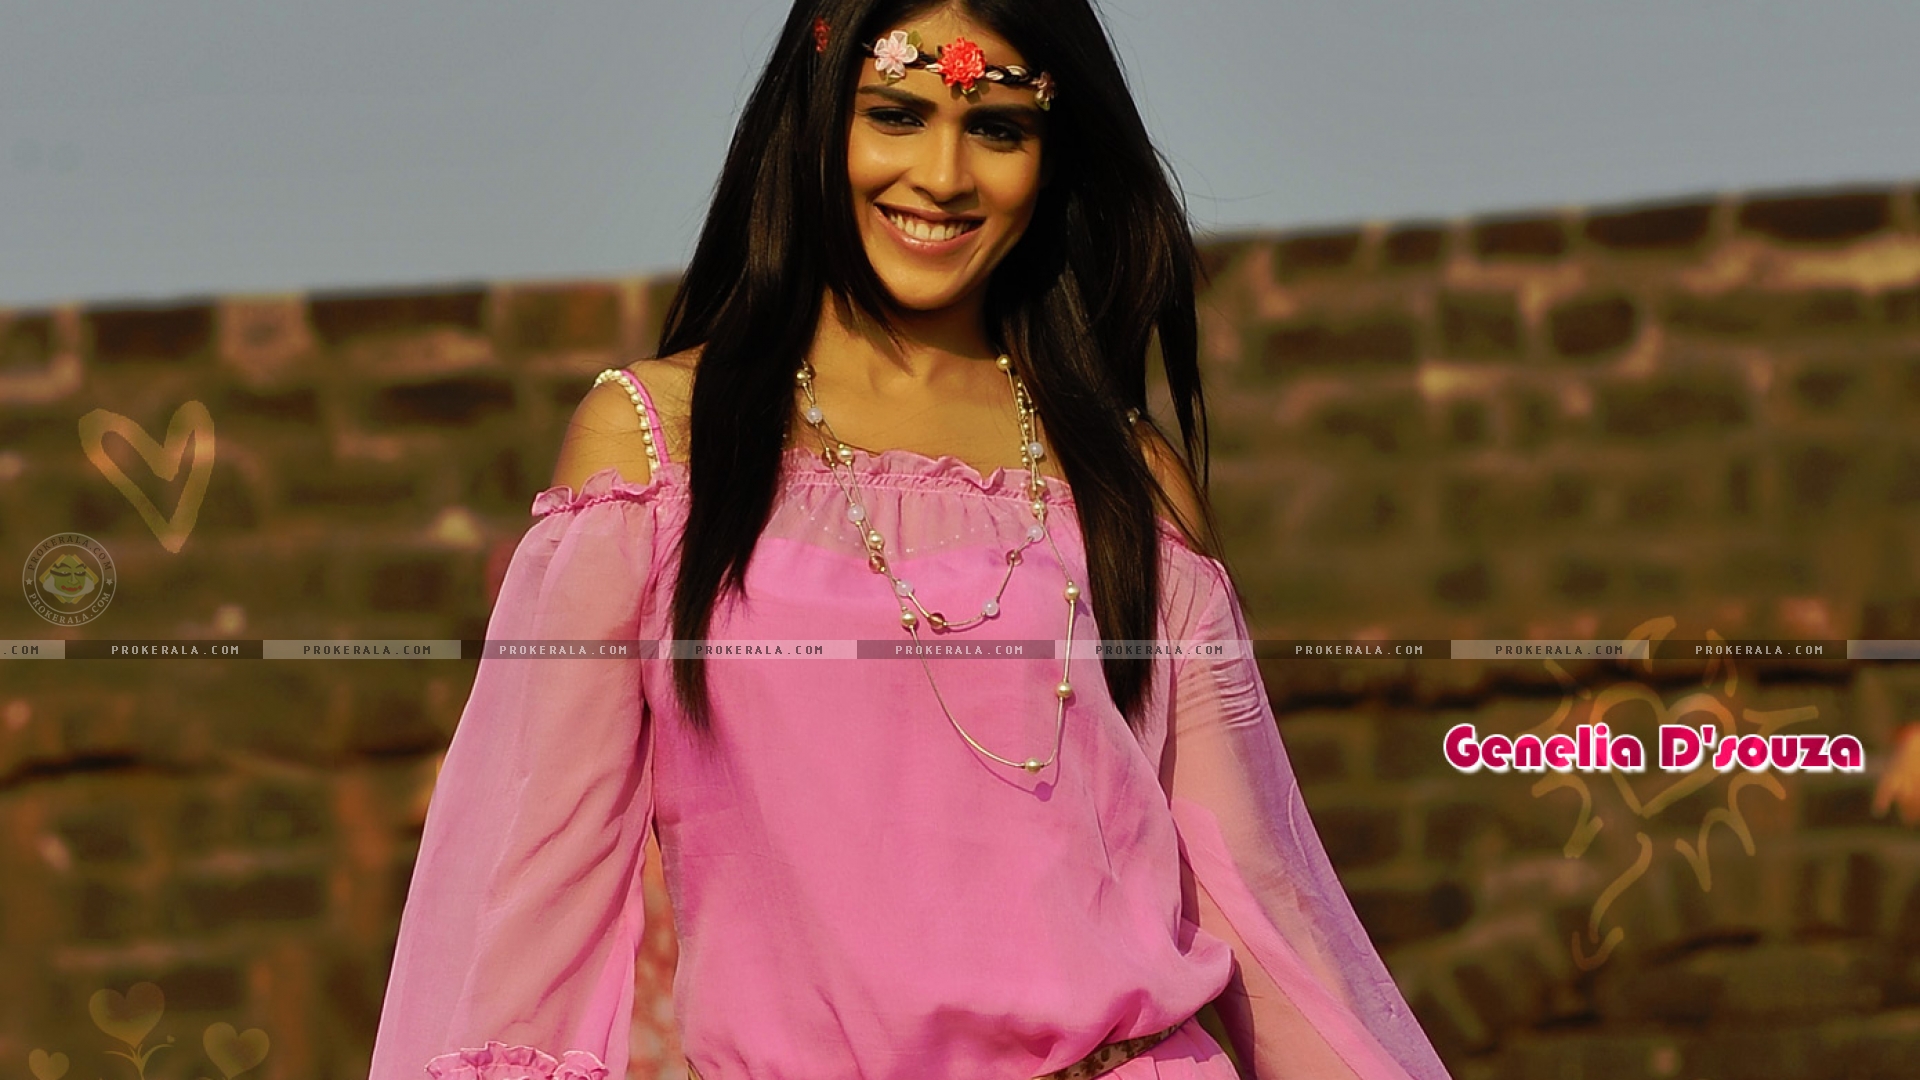 Genelia Dsouza Wallpapers High Quality Wallpapers of Actress